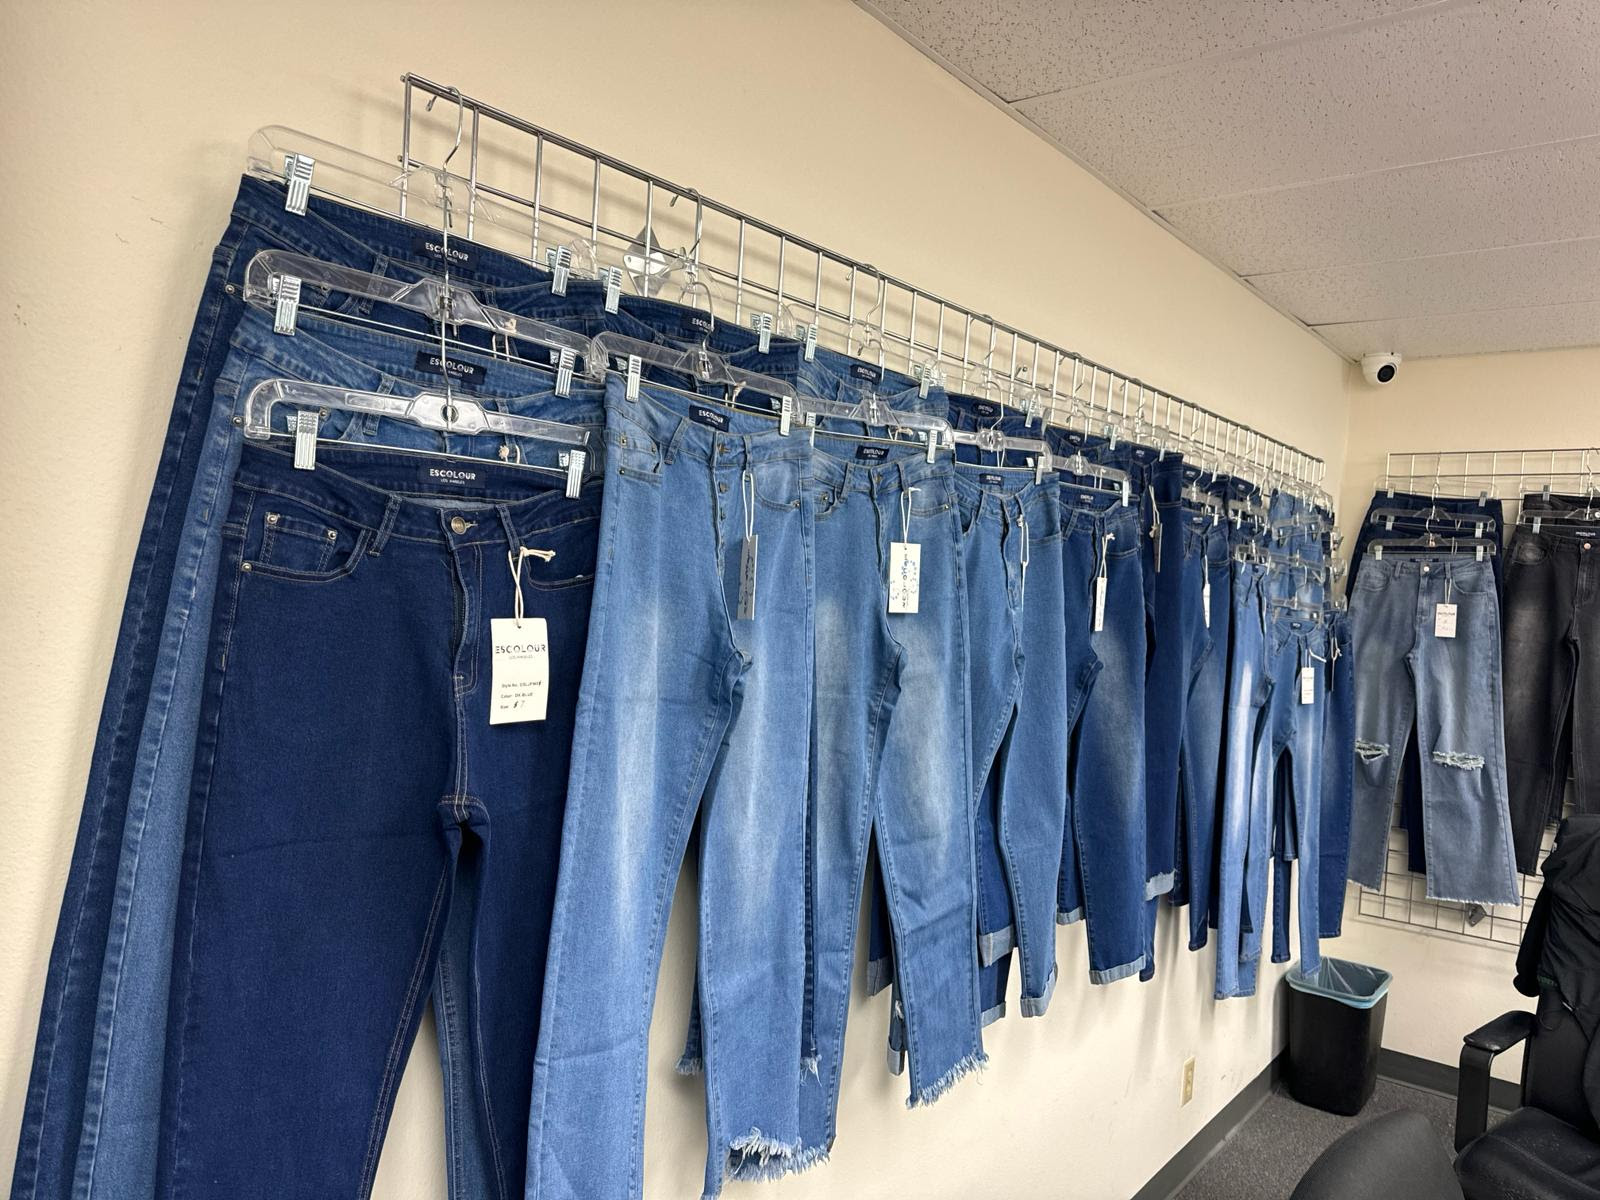 Junior Stretch Fashion Jeans . 13,440 Pairs. EXW Los Angeles $4.50 Pair.